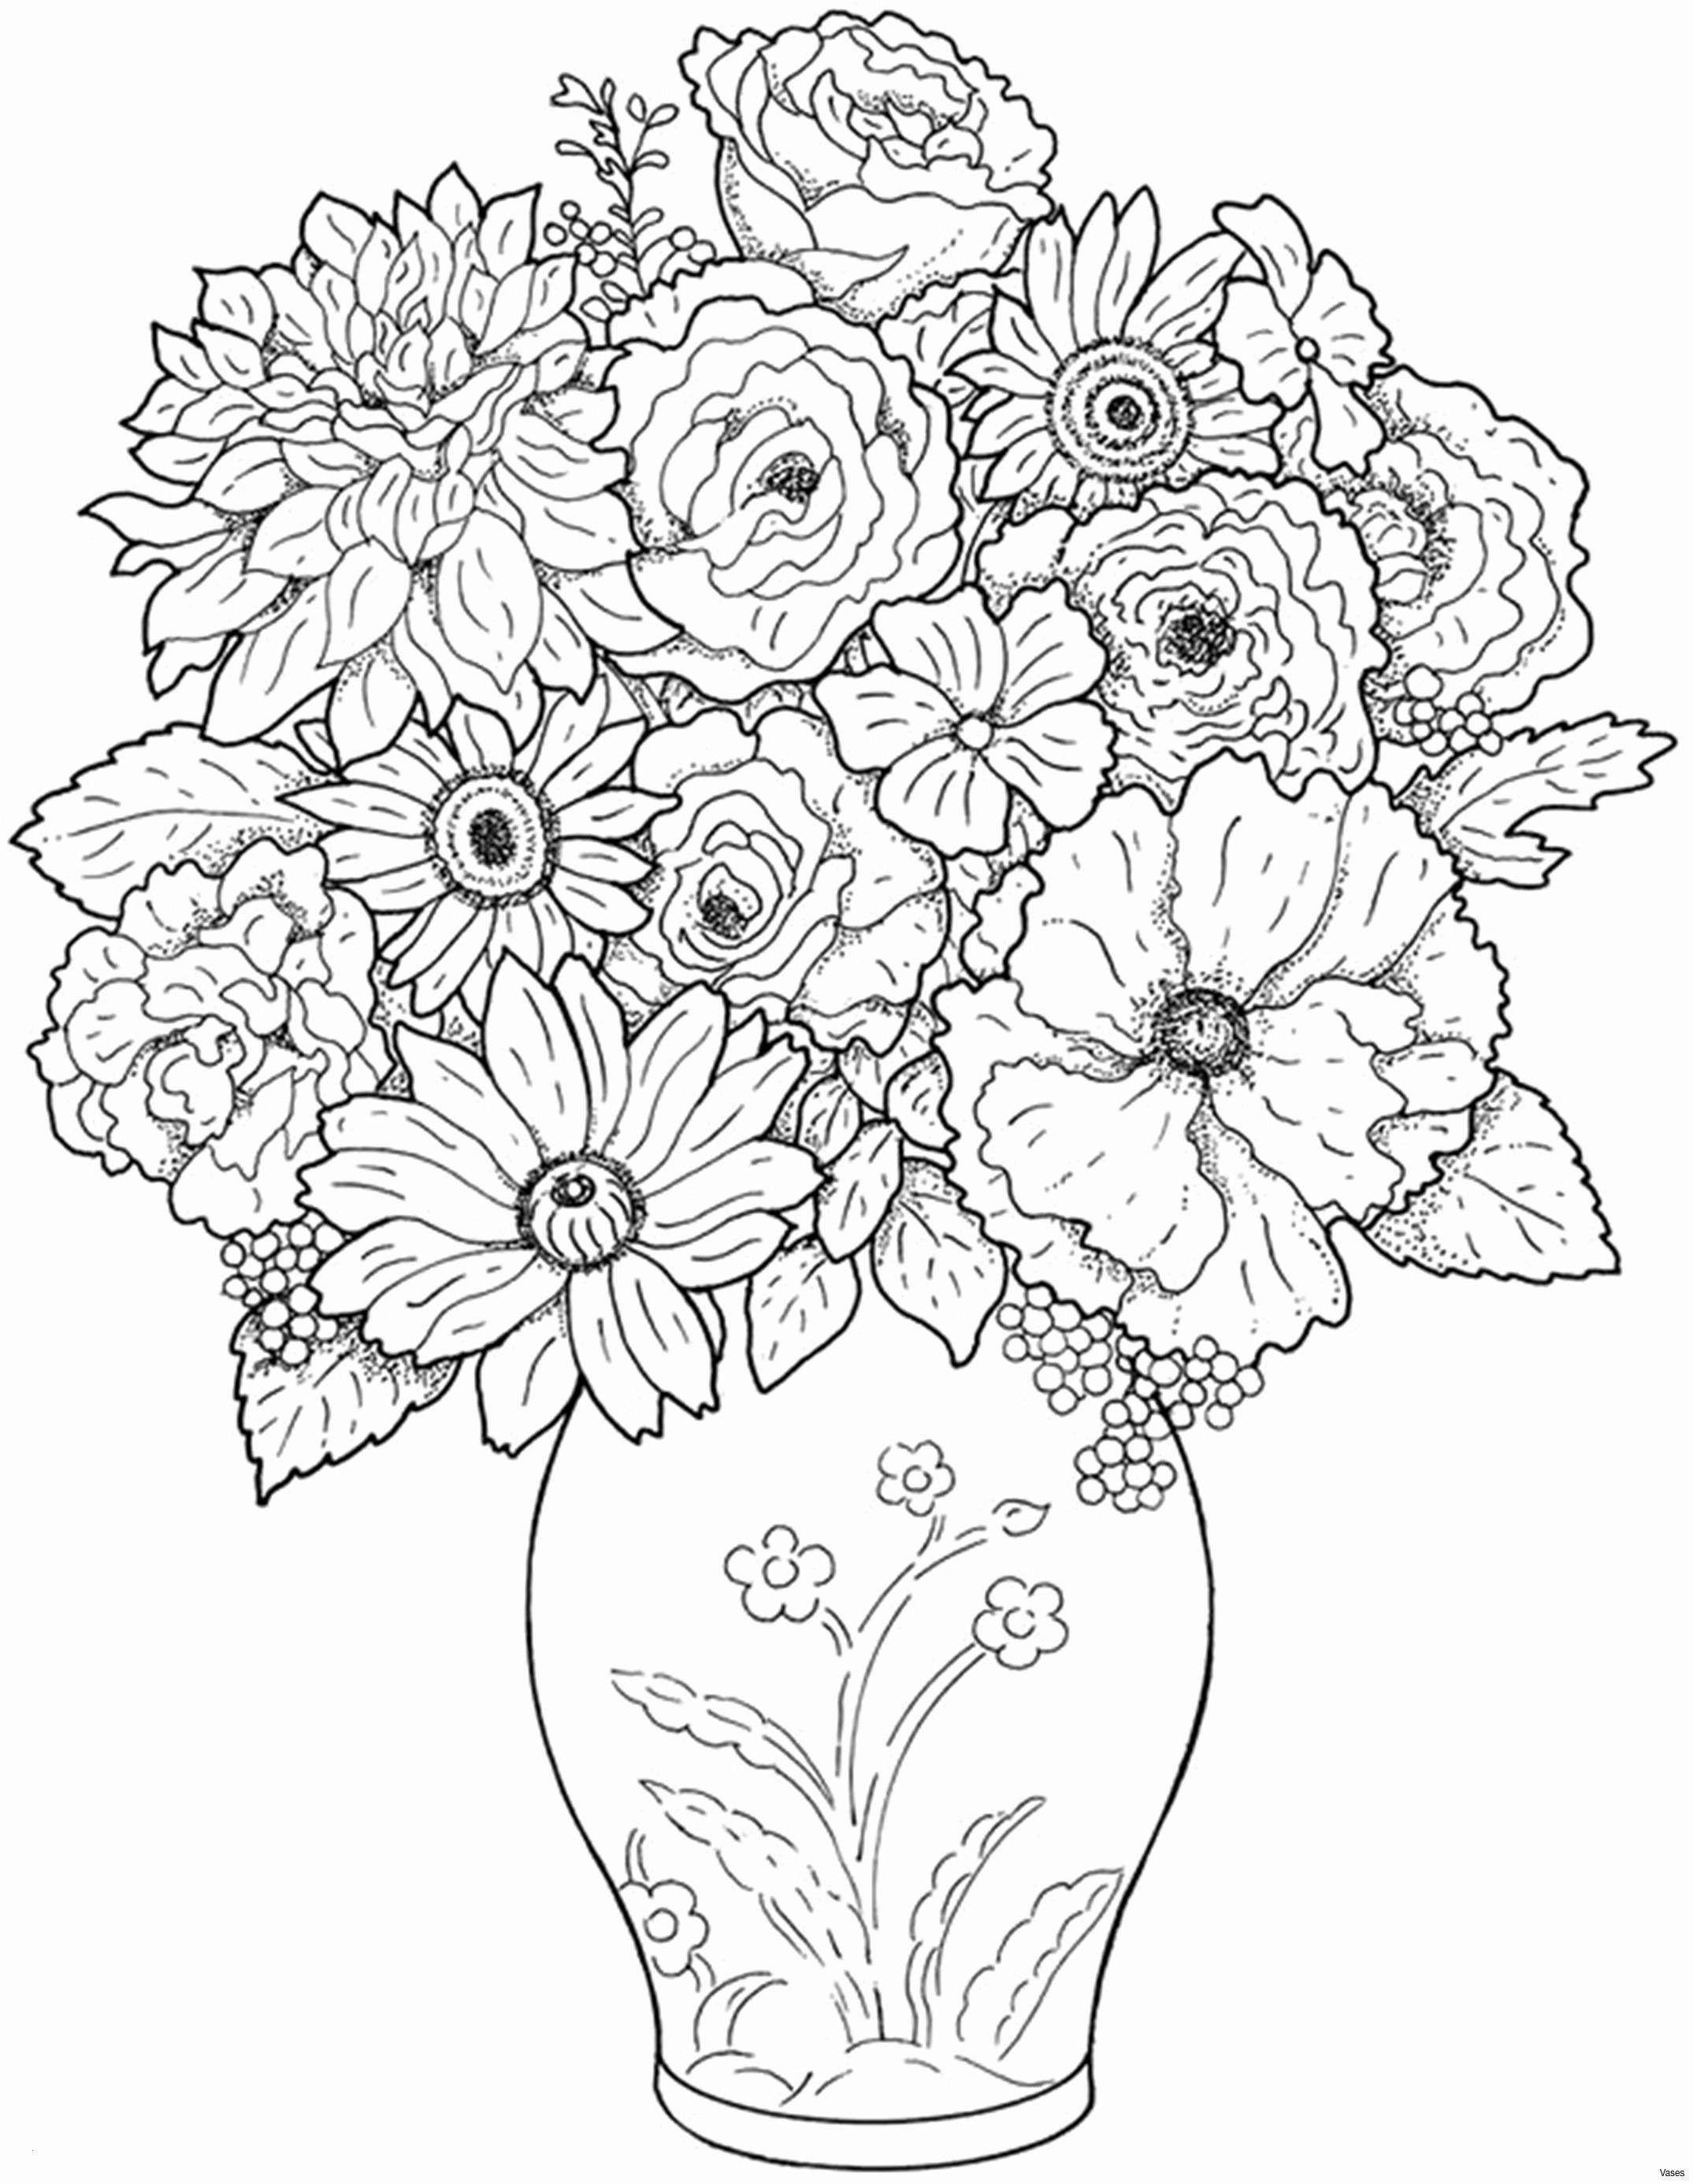 24 Perfect Cemetery Vase Flowers 2024 free download cemetery vase flowers of christmas flowers coloring pages 34 inspirational flower coloring with regard to christmas flowers coloring pages 34 inspirational flower coloring cloud9vegas